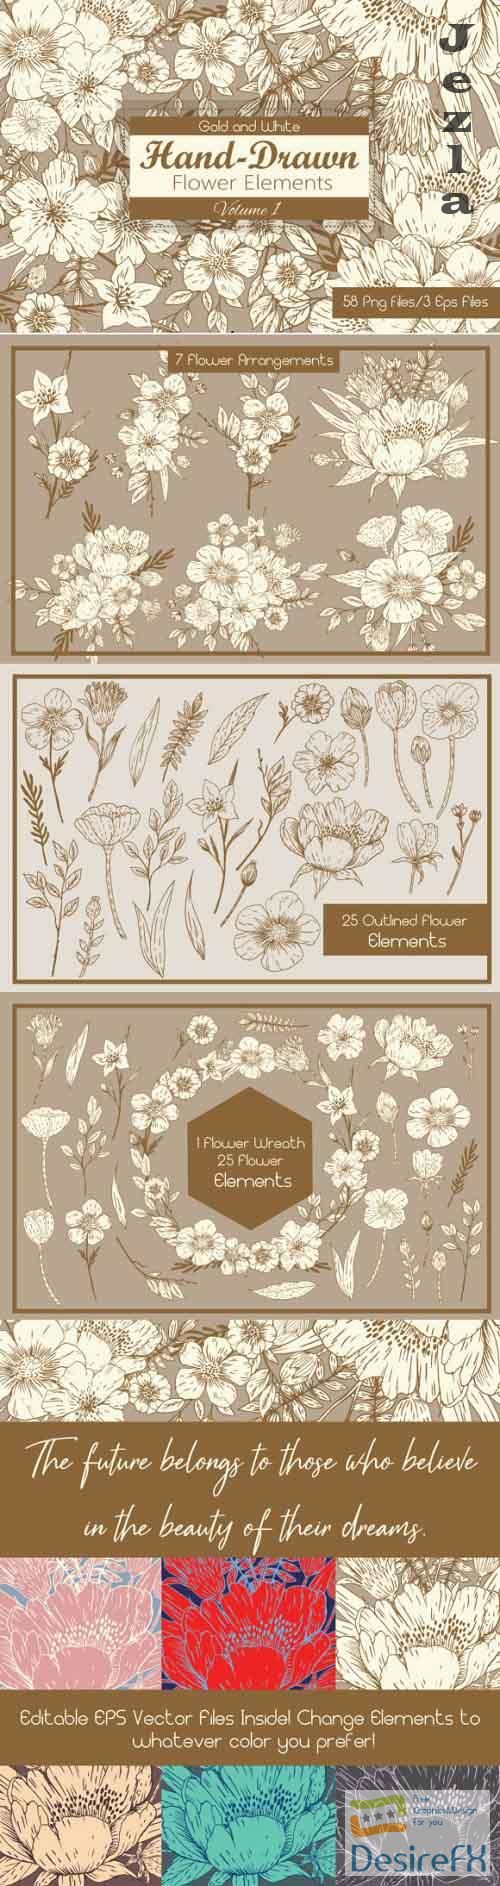 Gold and White HandDrawn Flower Elements